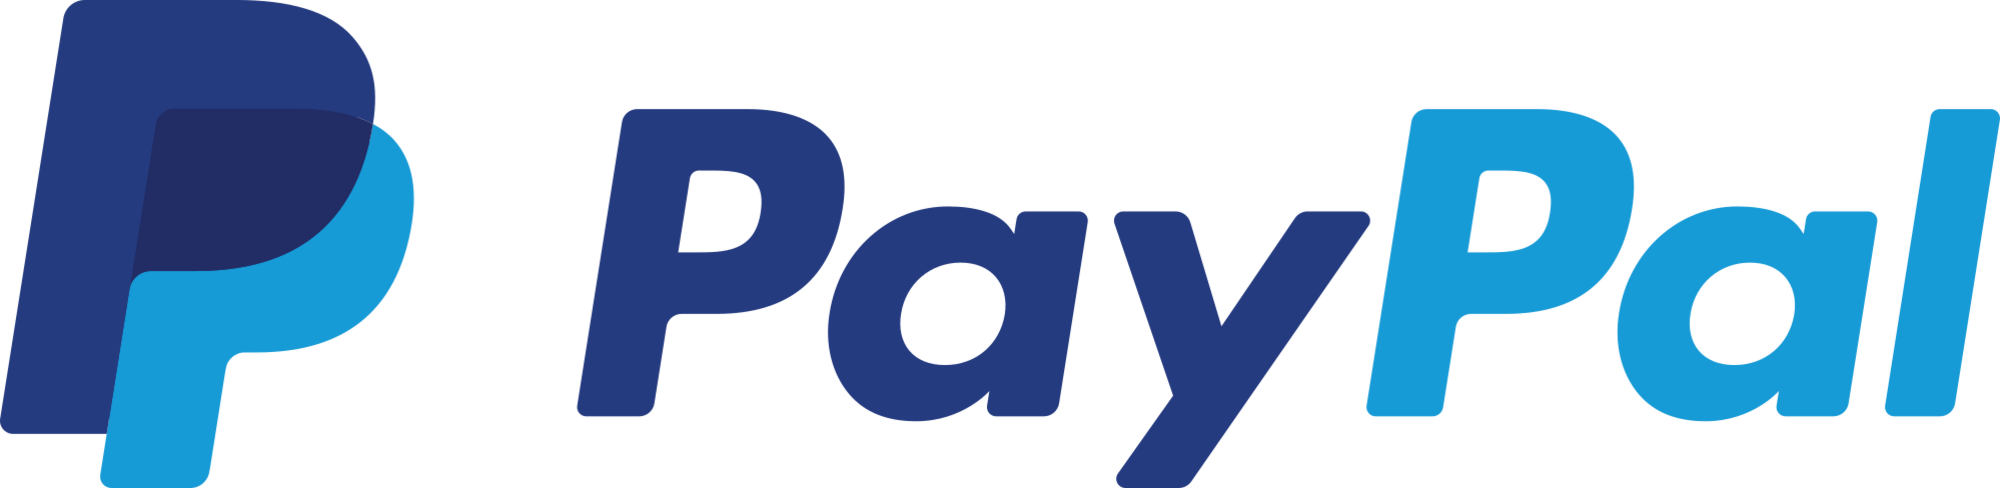 Logo for PayPal